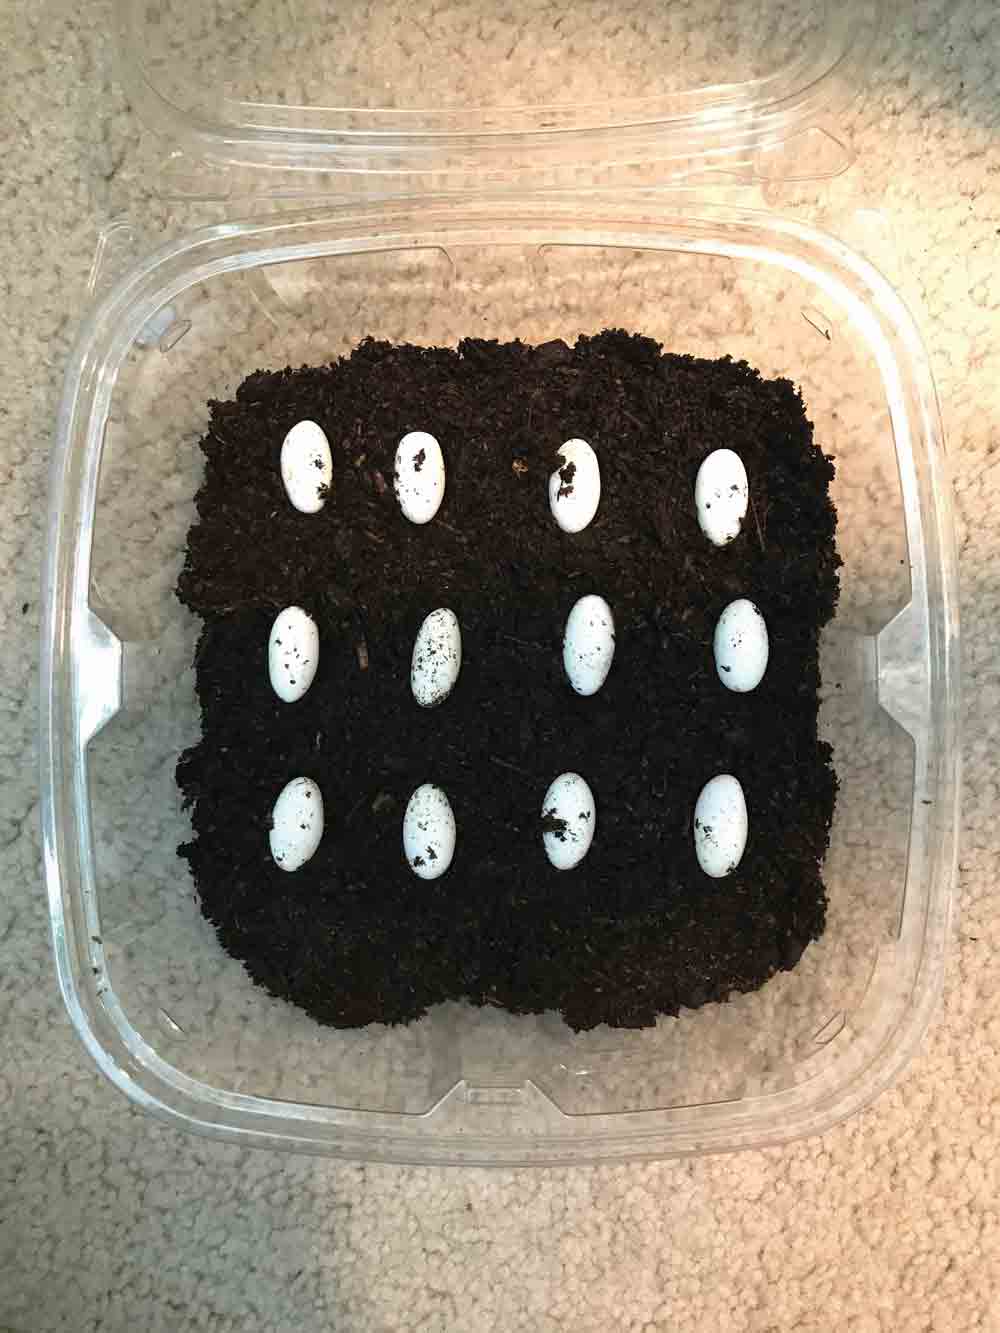 Chinese water dragon eggs